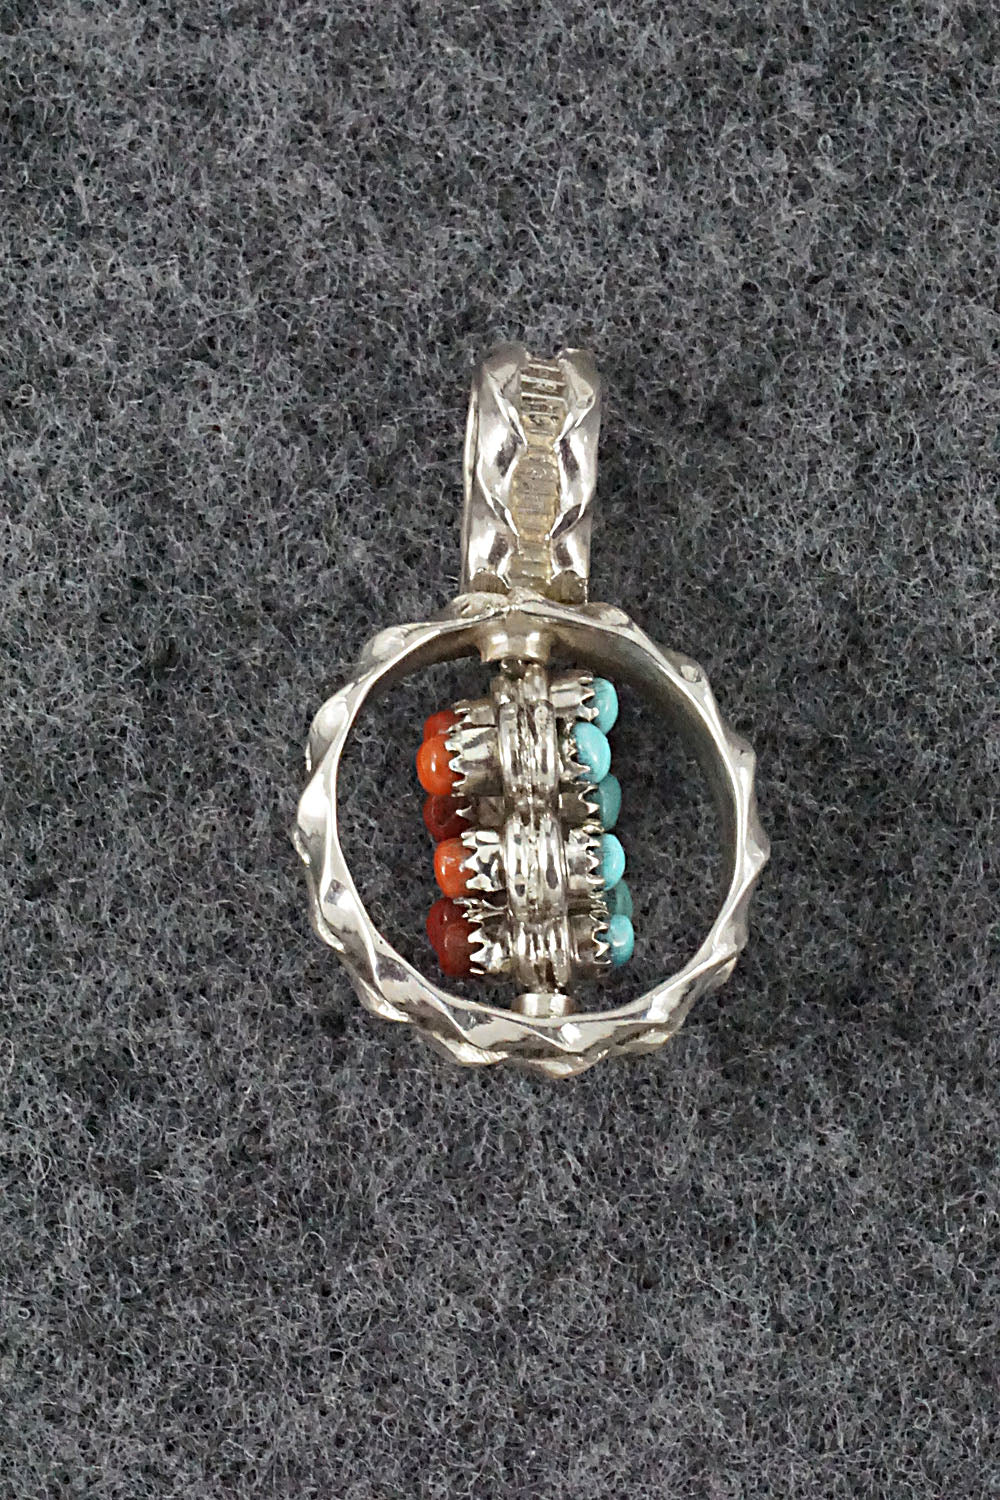 Coral, Turquoise & Sterling Silver Pendant - Wayne Johnson